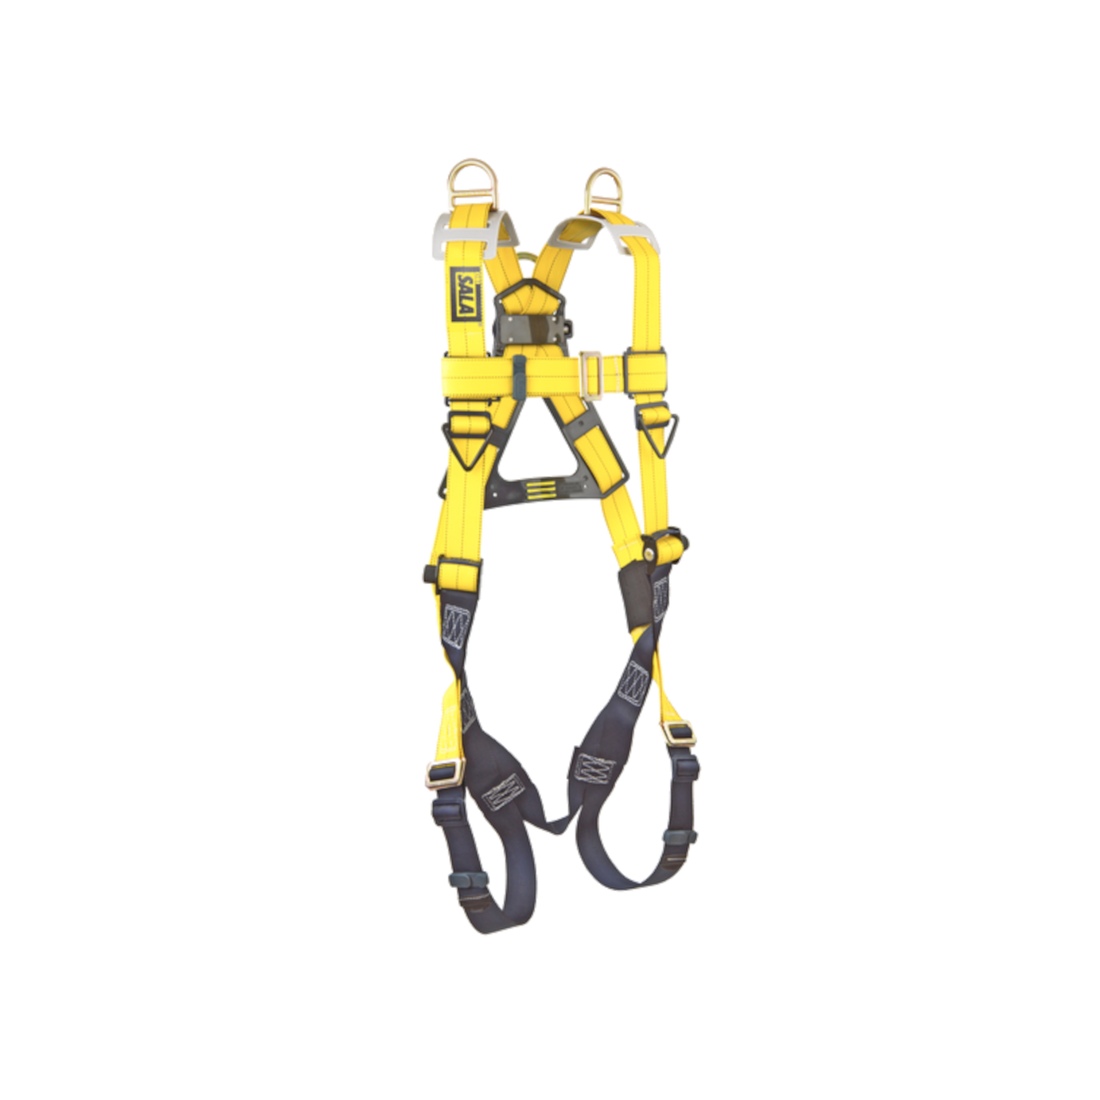 Safety Harness 